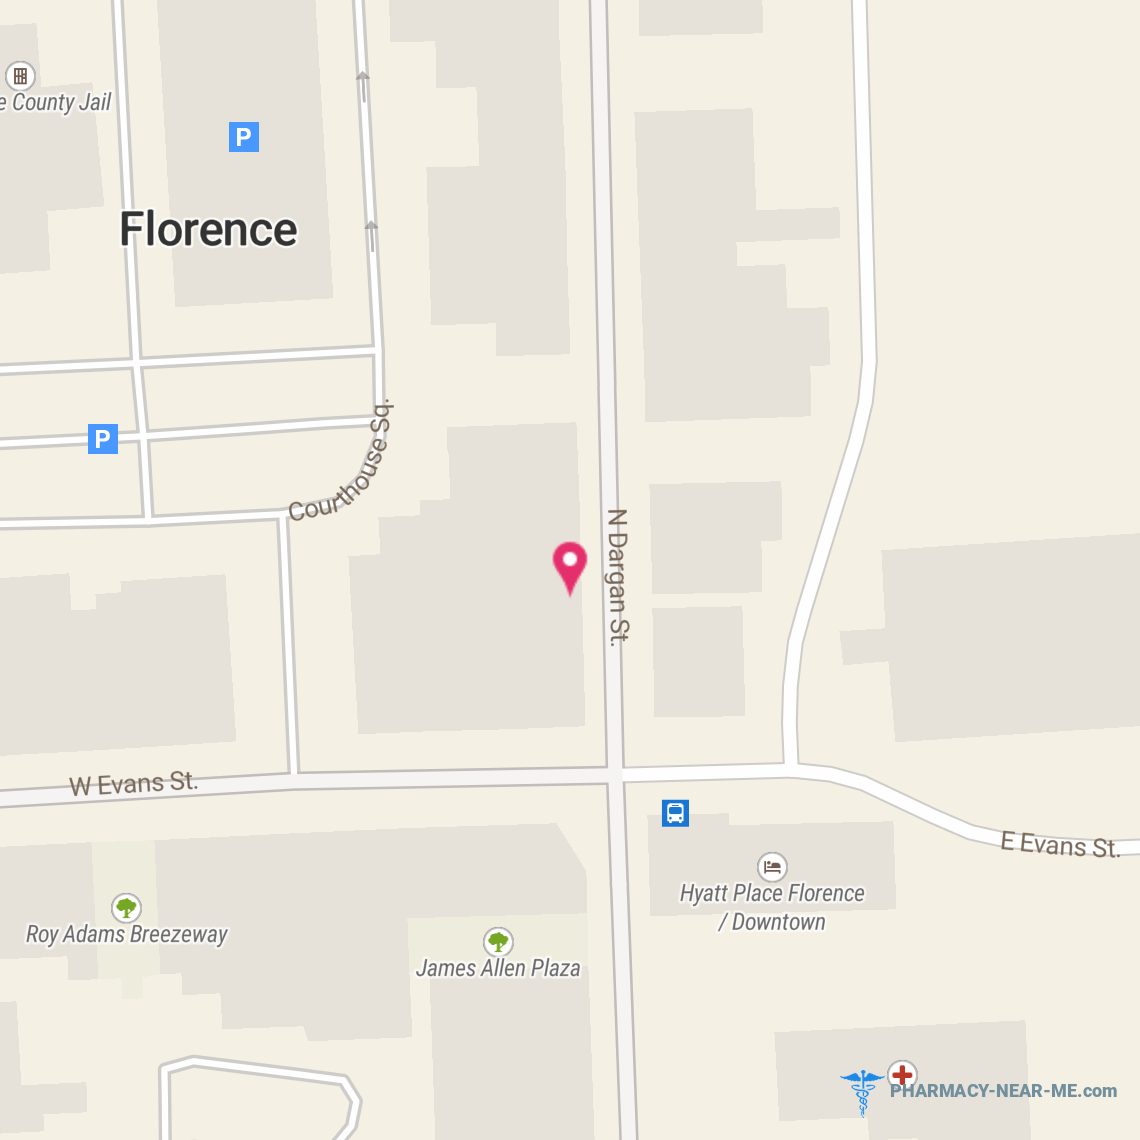 FLORENCE PHARMACY - Pharmacy Hours, Phone, Reviews & Information: 123 South Dargan Street, Florence, South Carolina 29506, United States